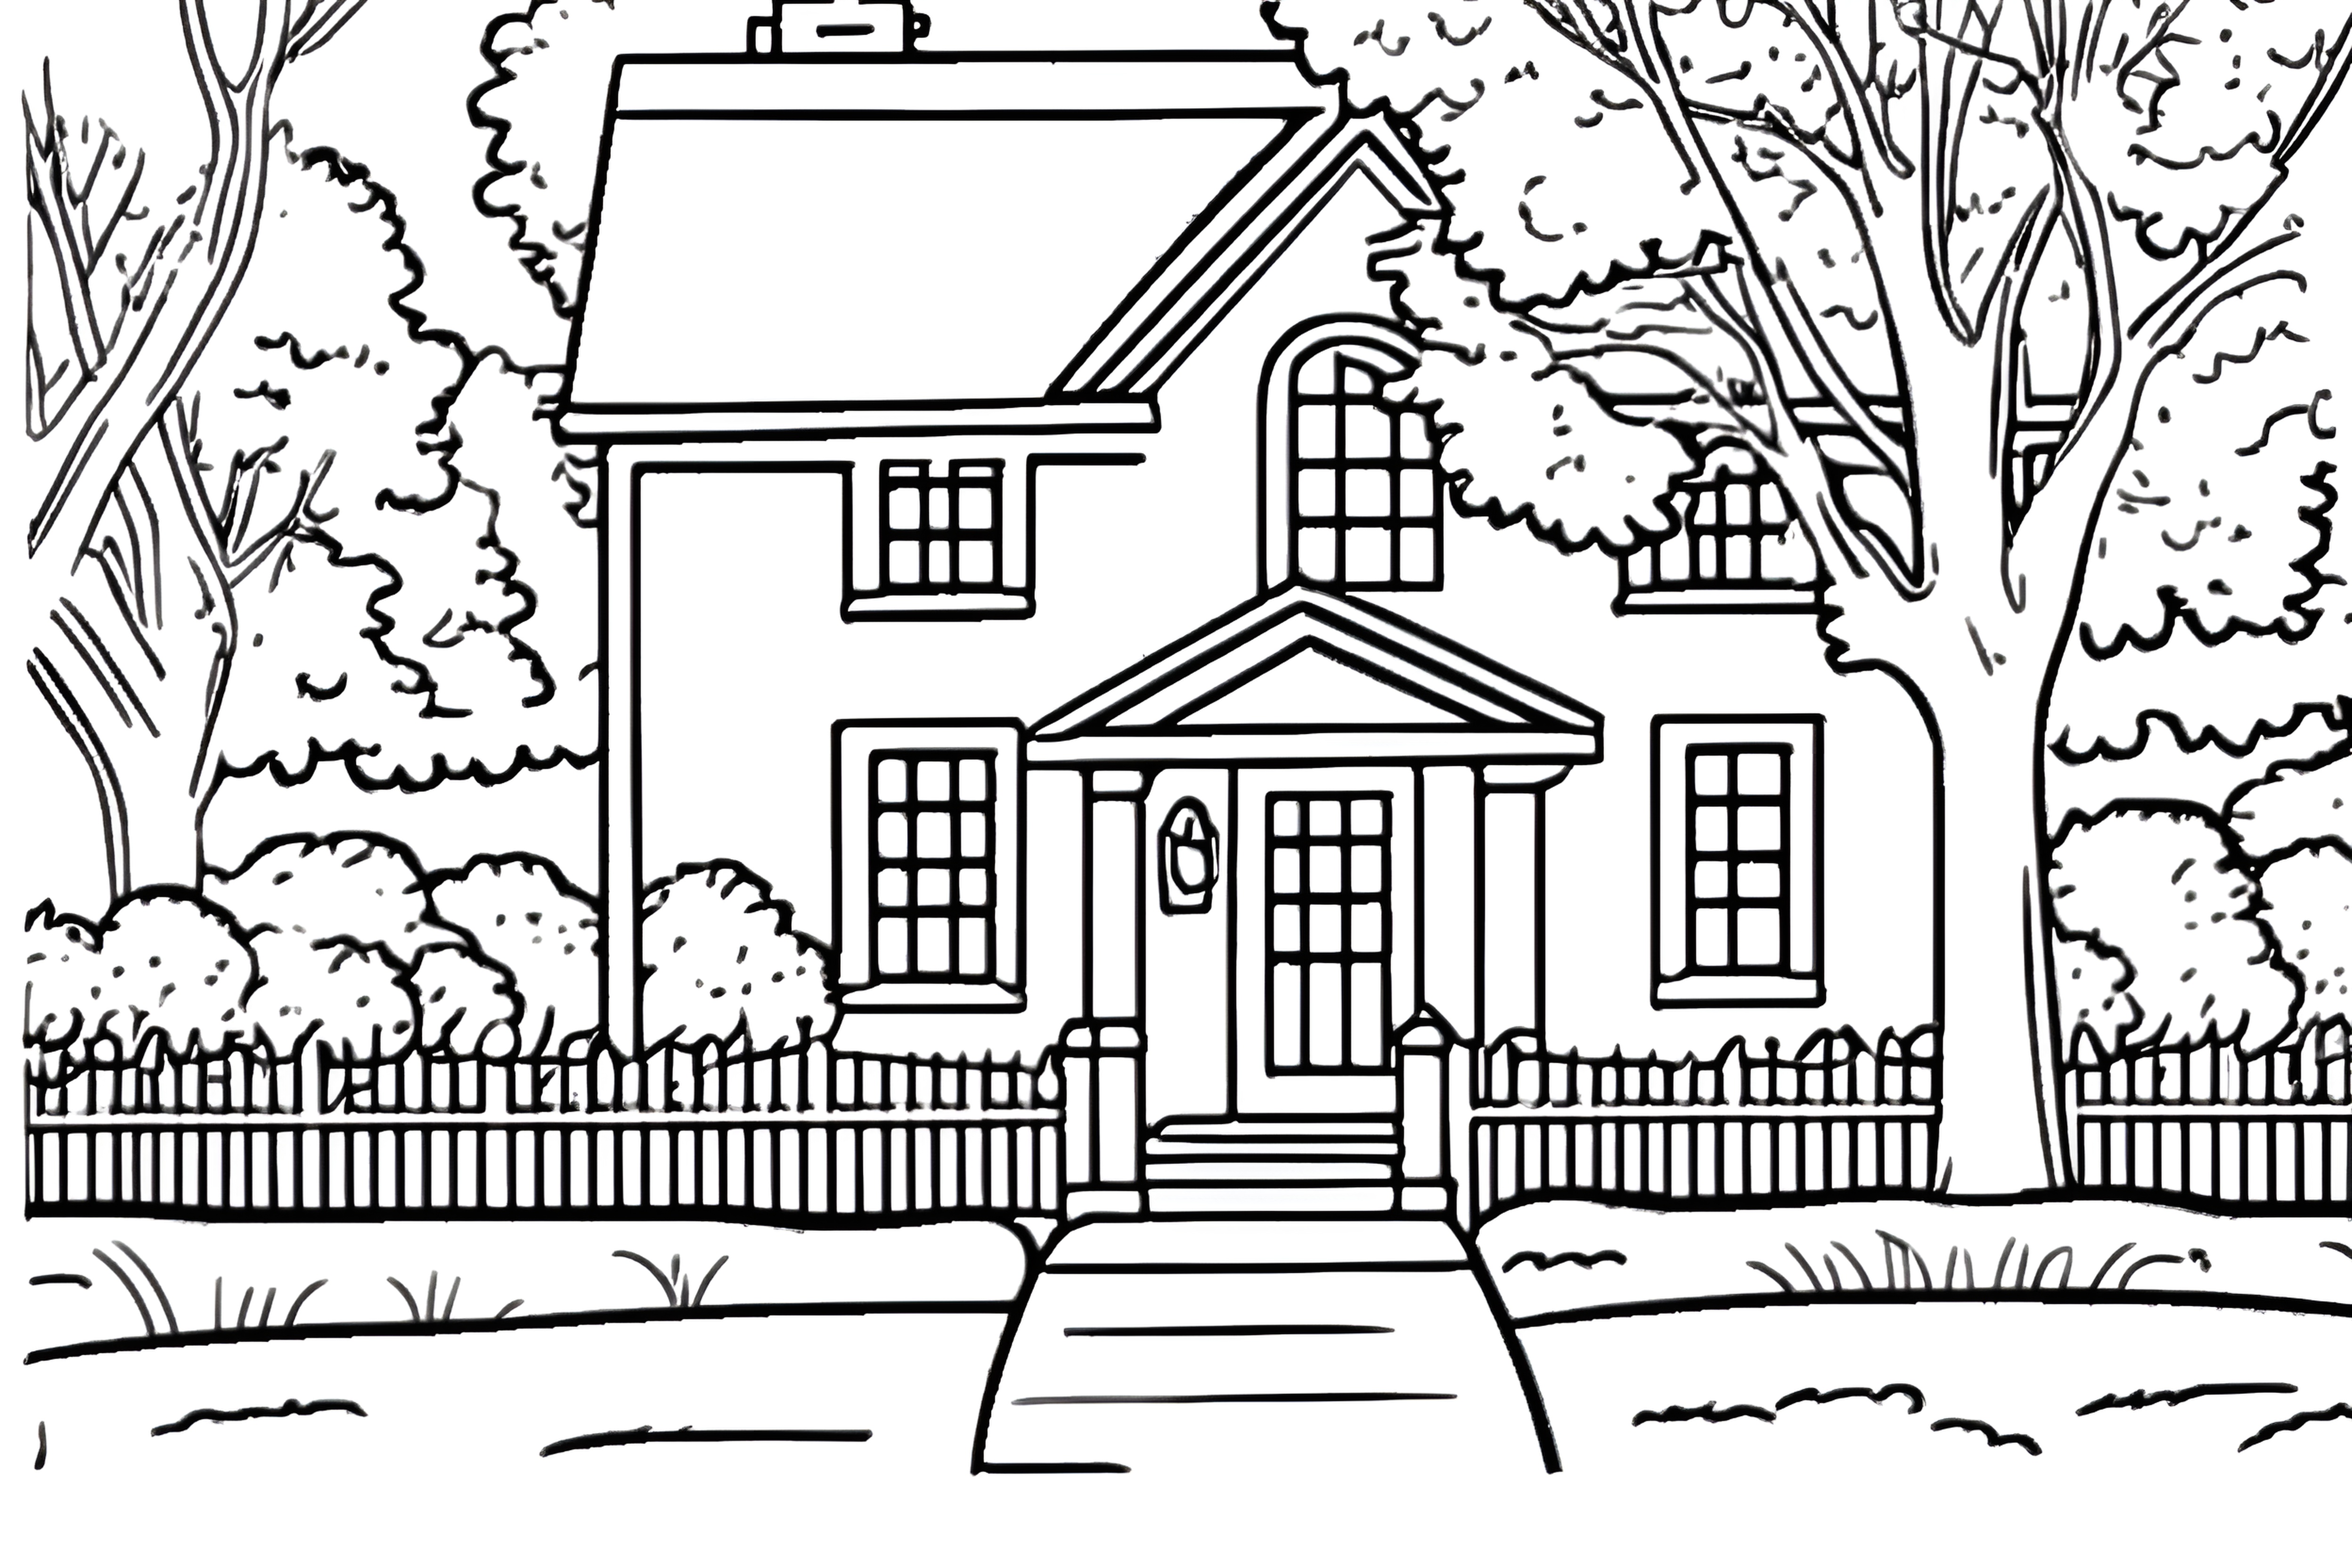 Photo to art example: a coloring page made from a house photo